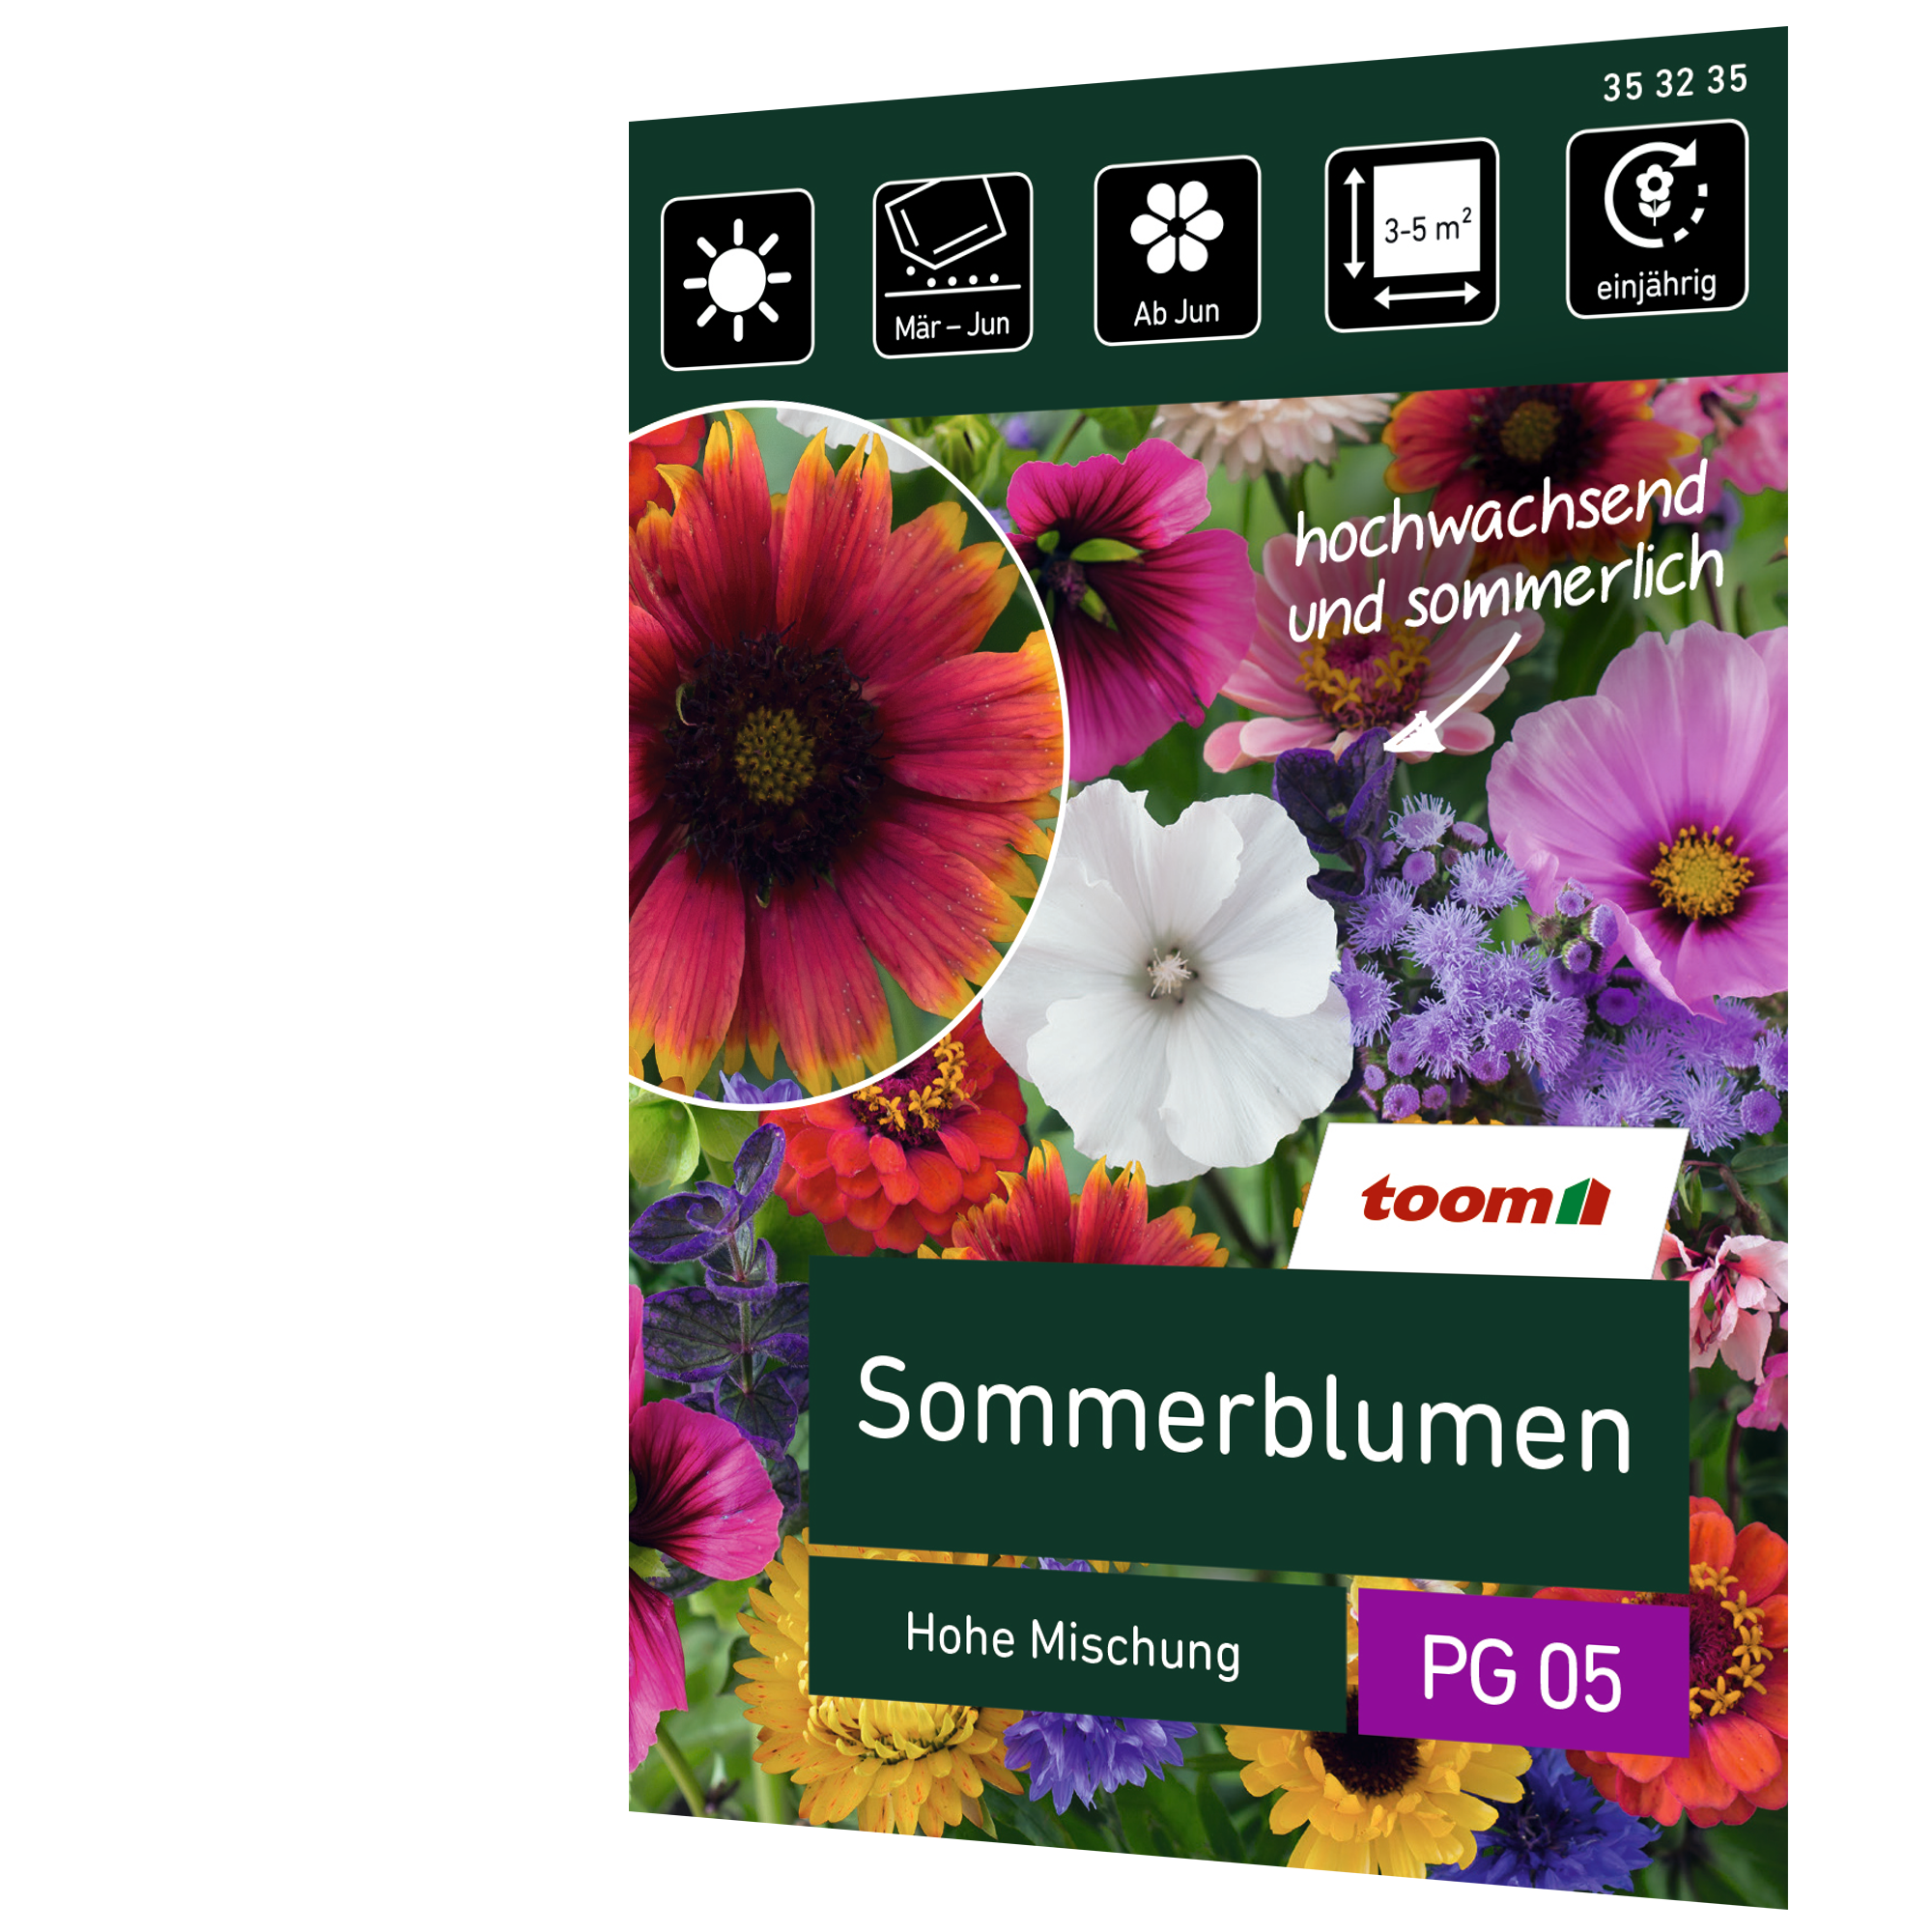 Sommerblumen 'Hohe Mischung' + product picture